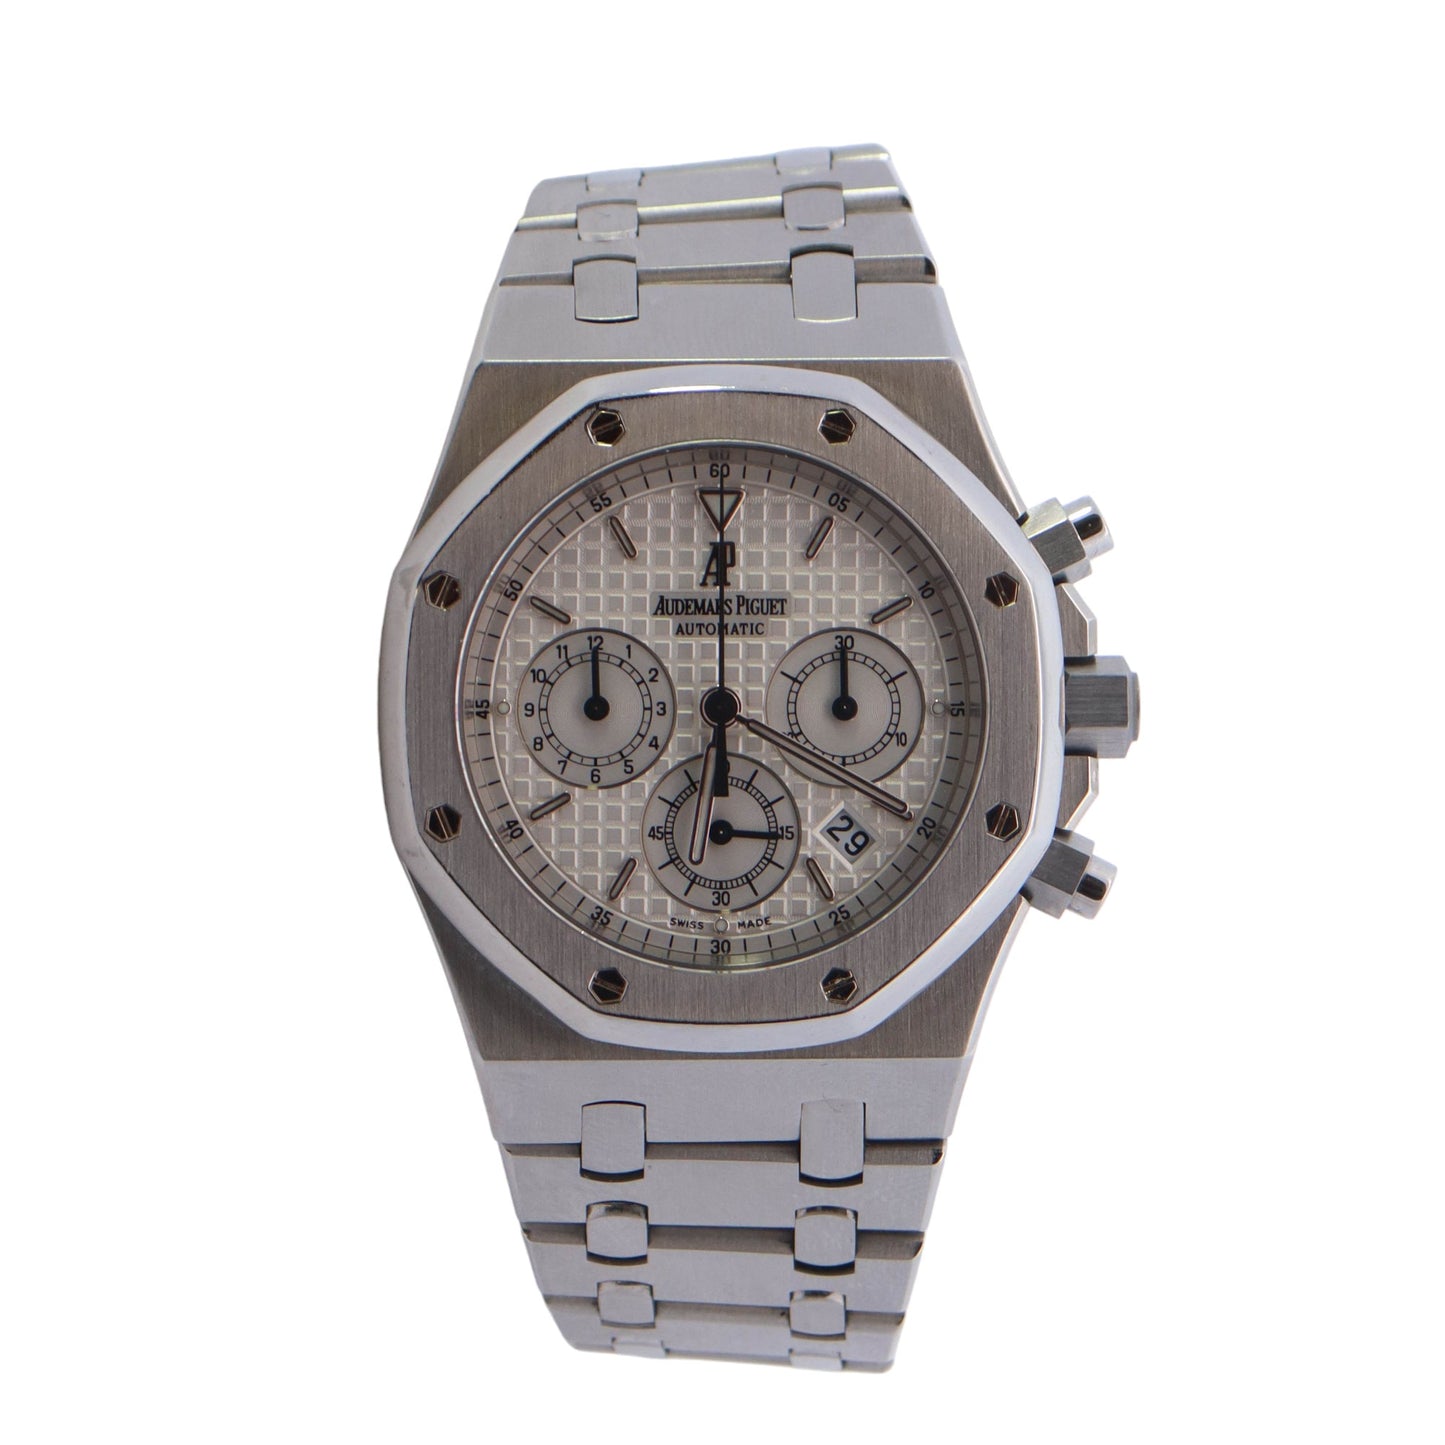 Audemars Piguet Royal Oak Chronograph Stainless Steel 39mm White Chronograph Stick Dial Watch Reference #: 25860ST.OO.1110ST.05